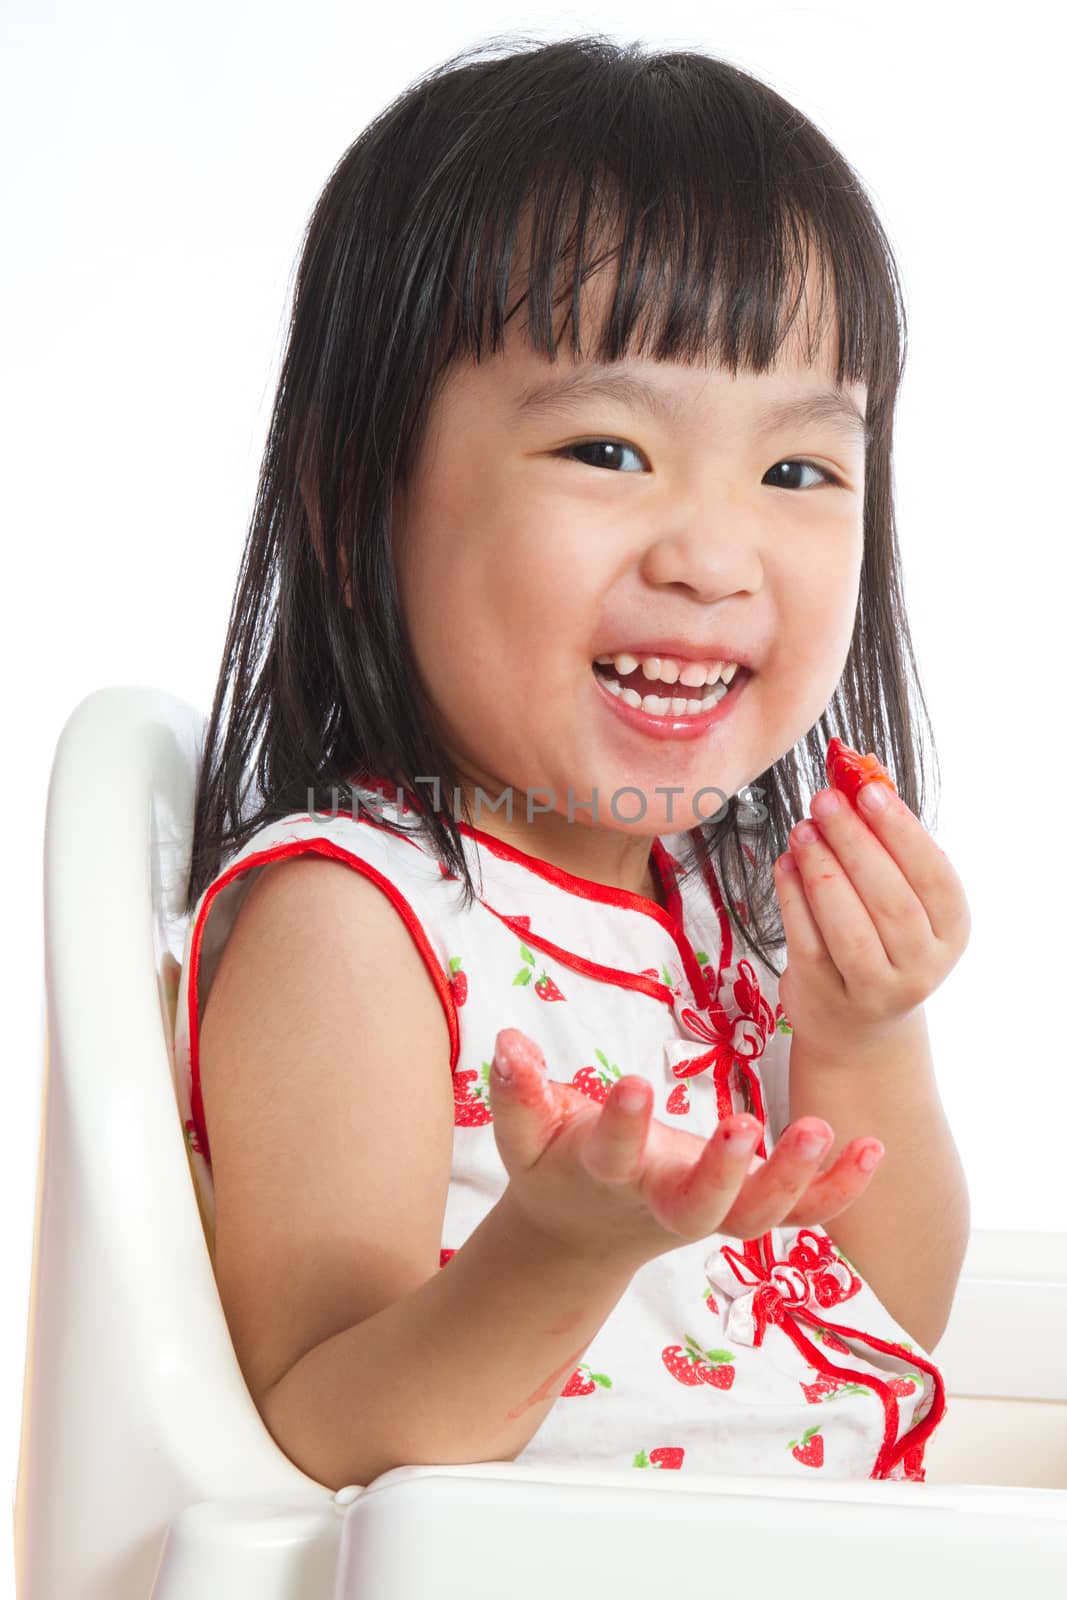 Asian Chinese little girl eating strawberries by kiankhoon